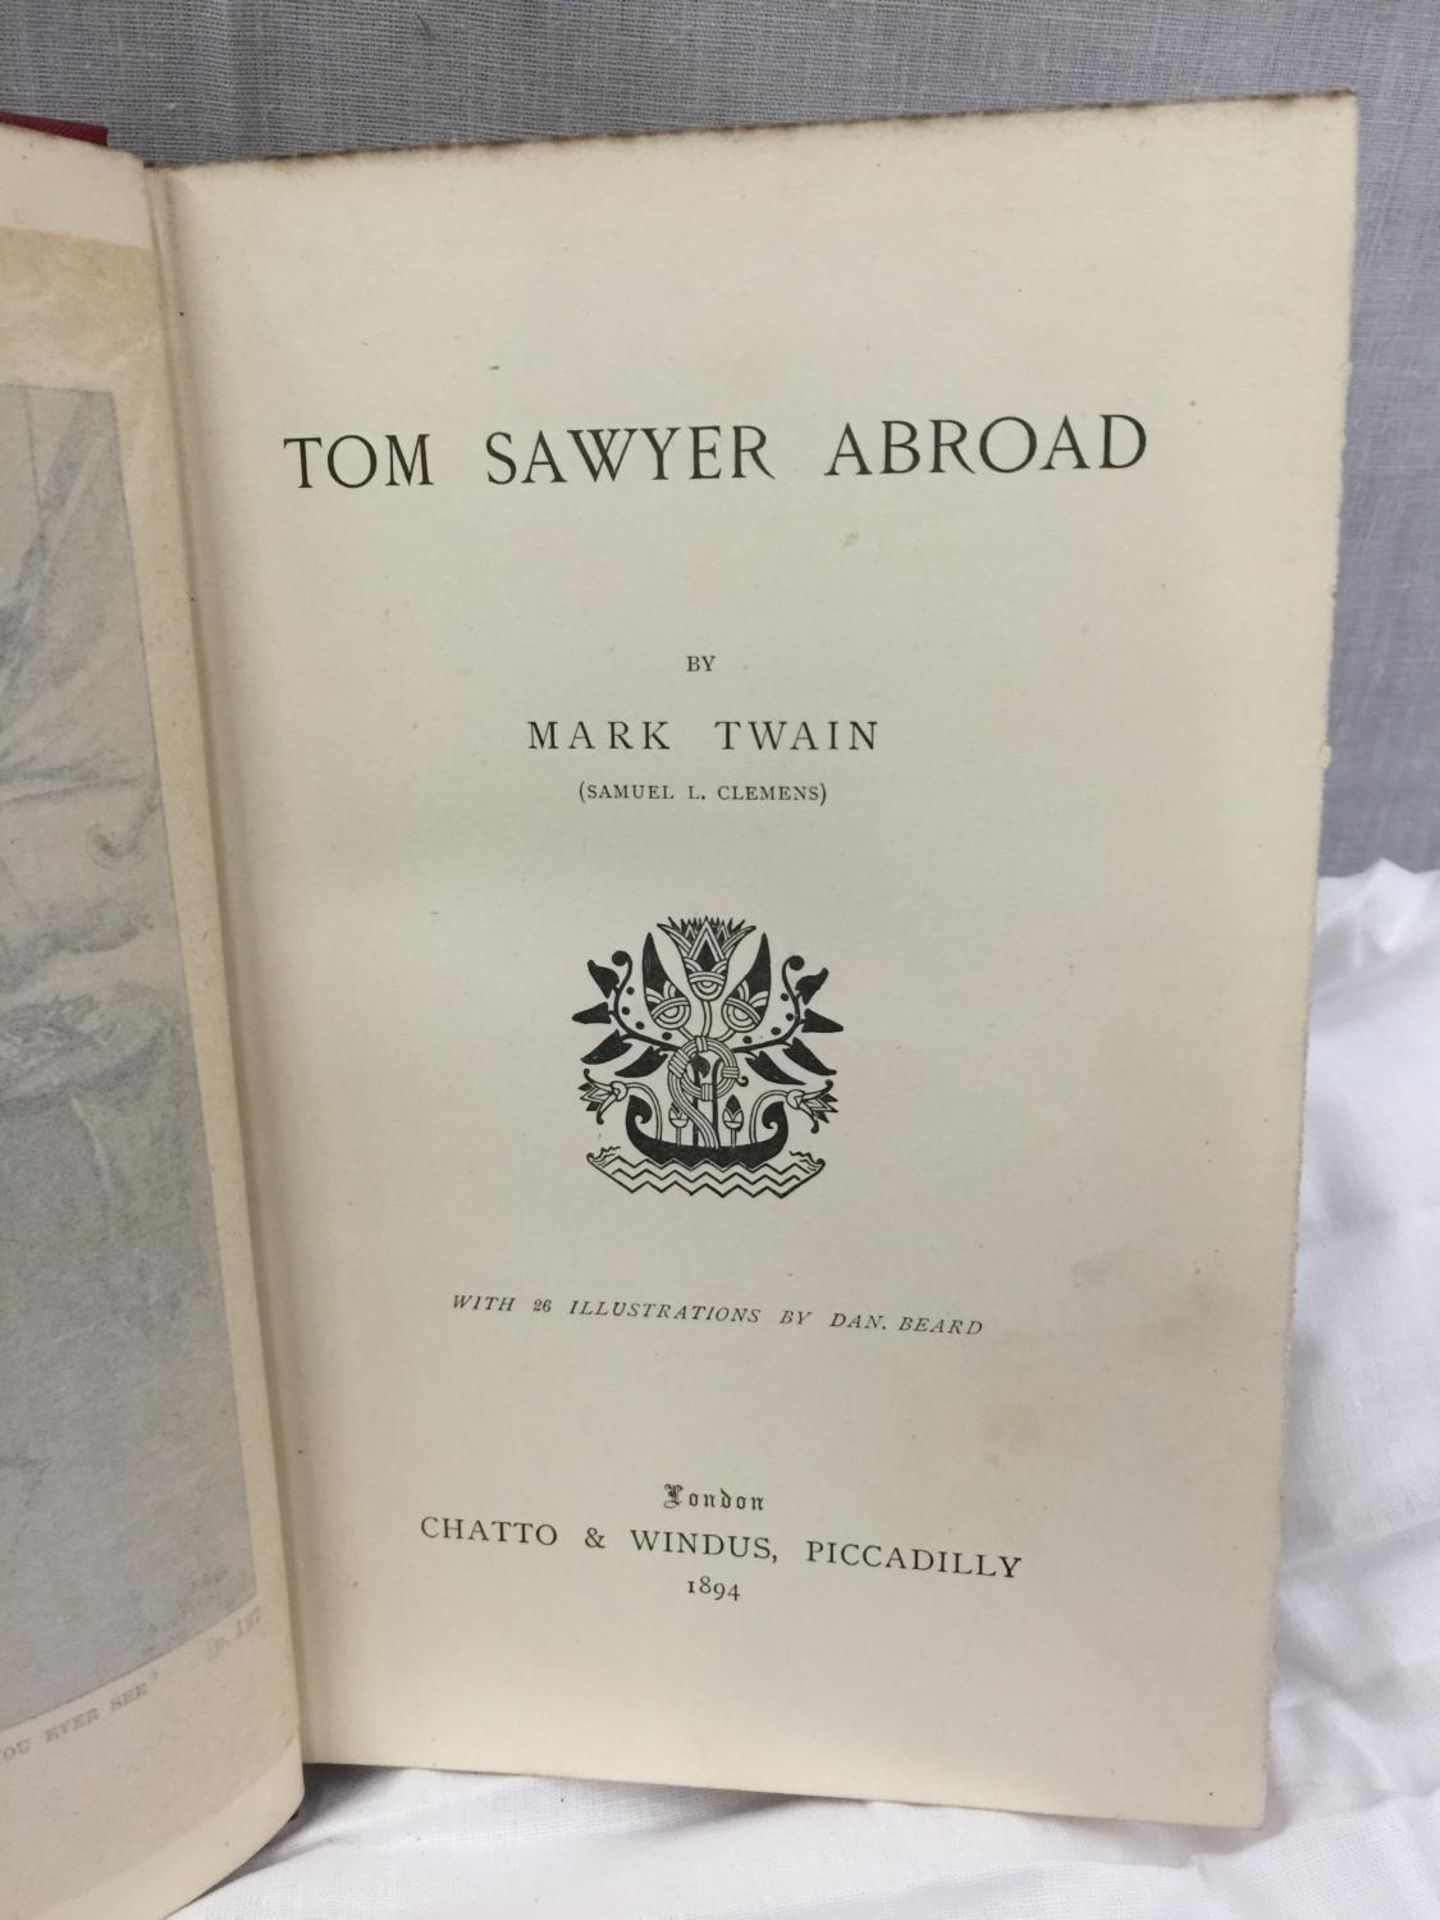 A FIRST EDITION TOM SAWYER ABROAD HARDBACK BY MARK TWAIN - PUBLISHED 1894 BY CHATTO & WINDUS - Image 4 of 7